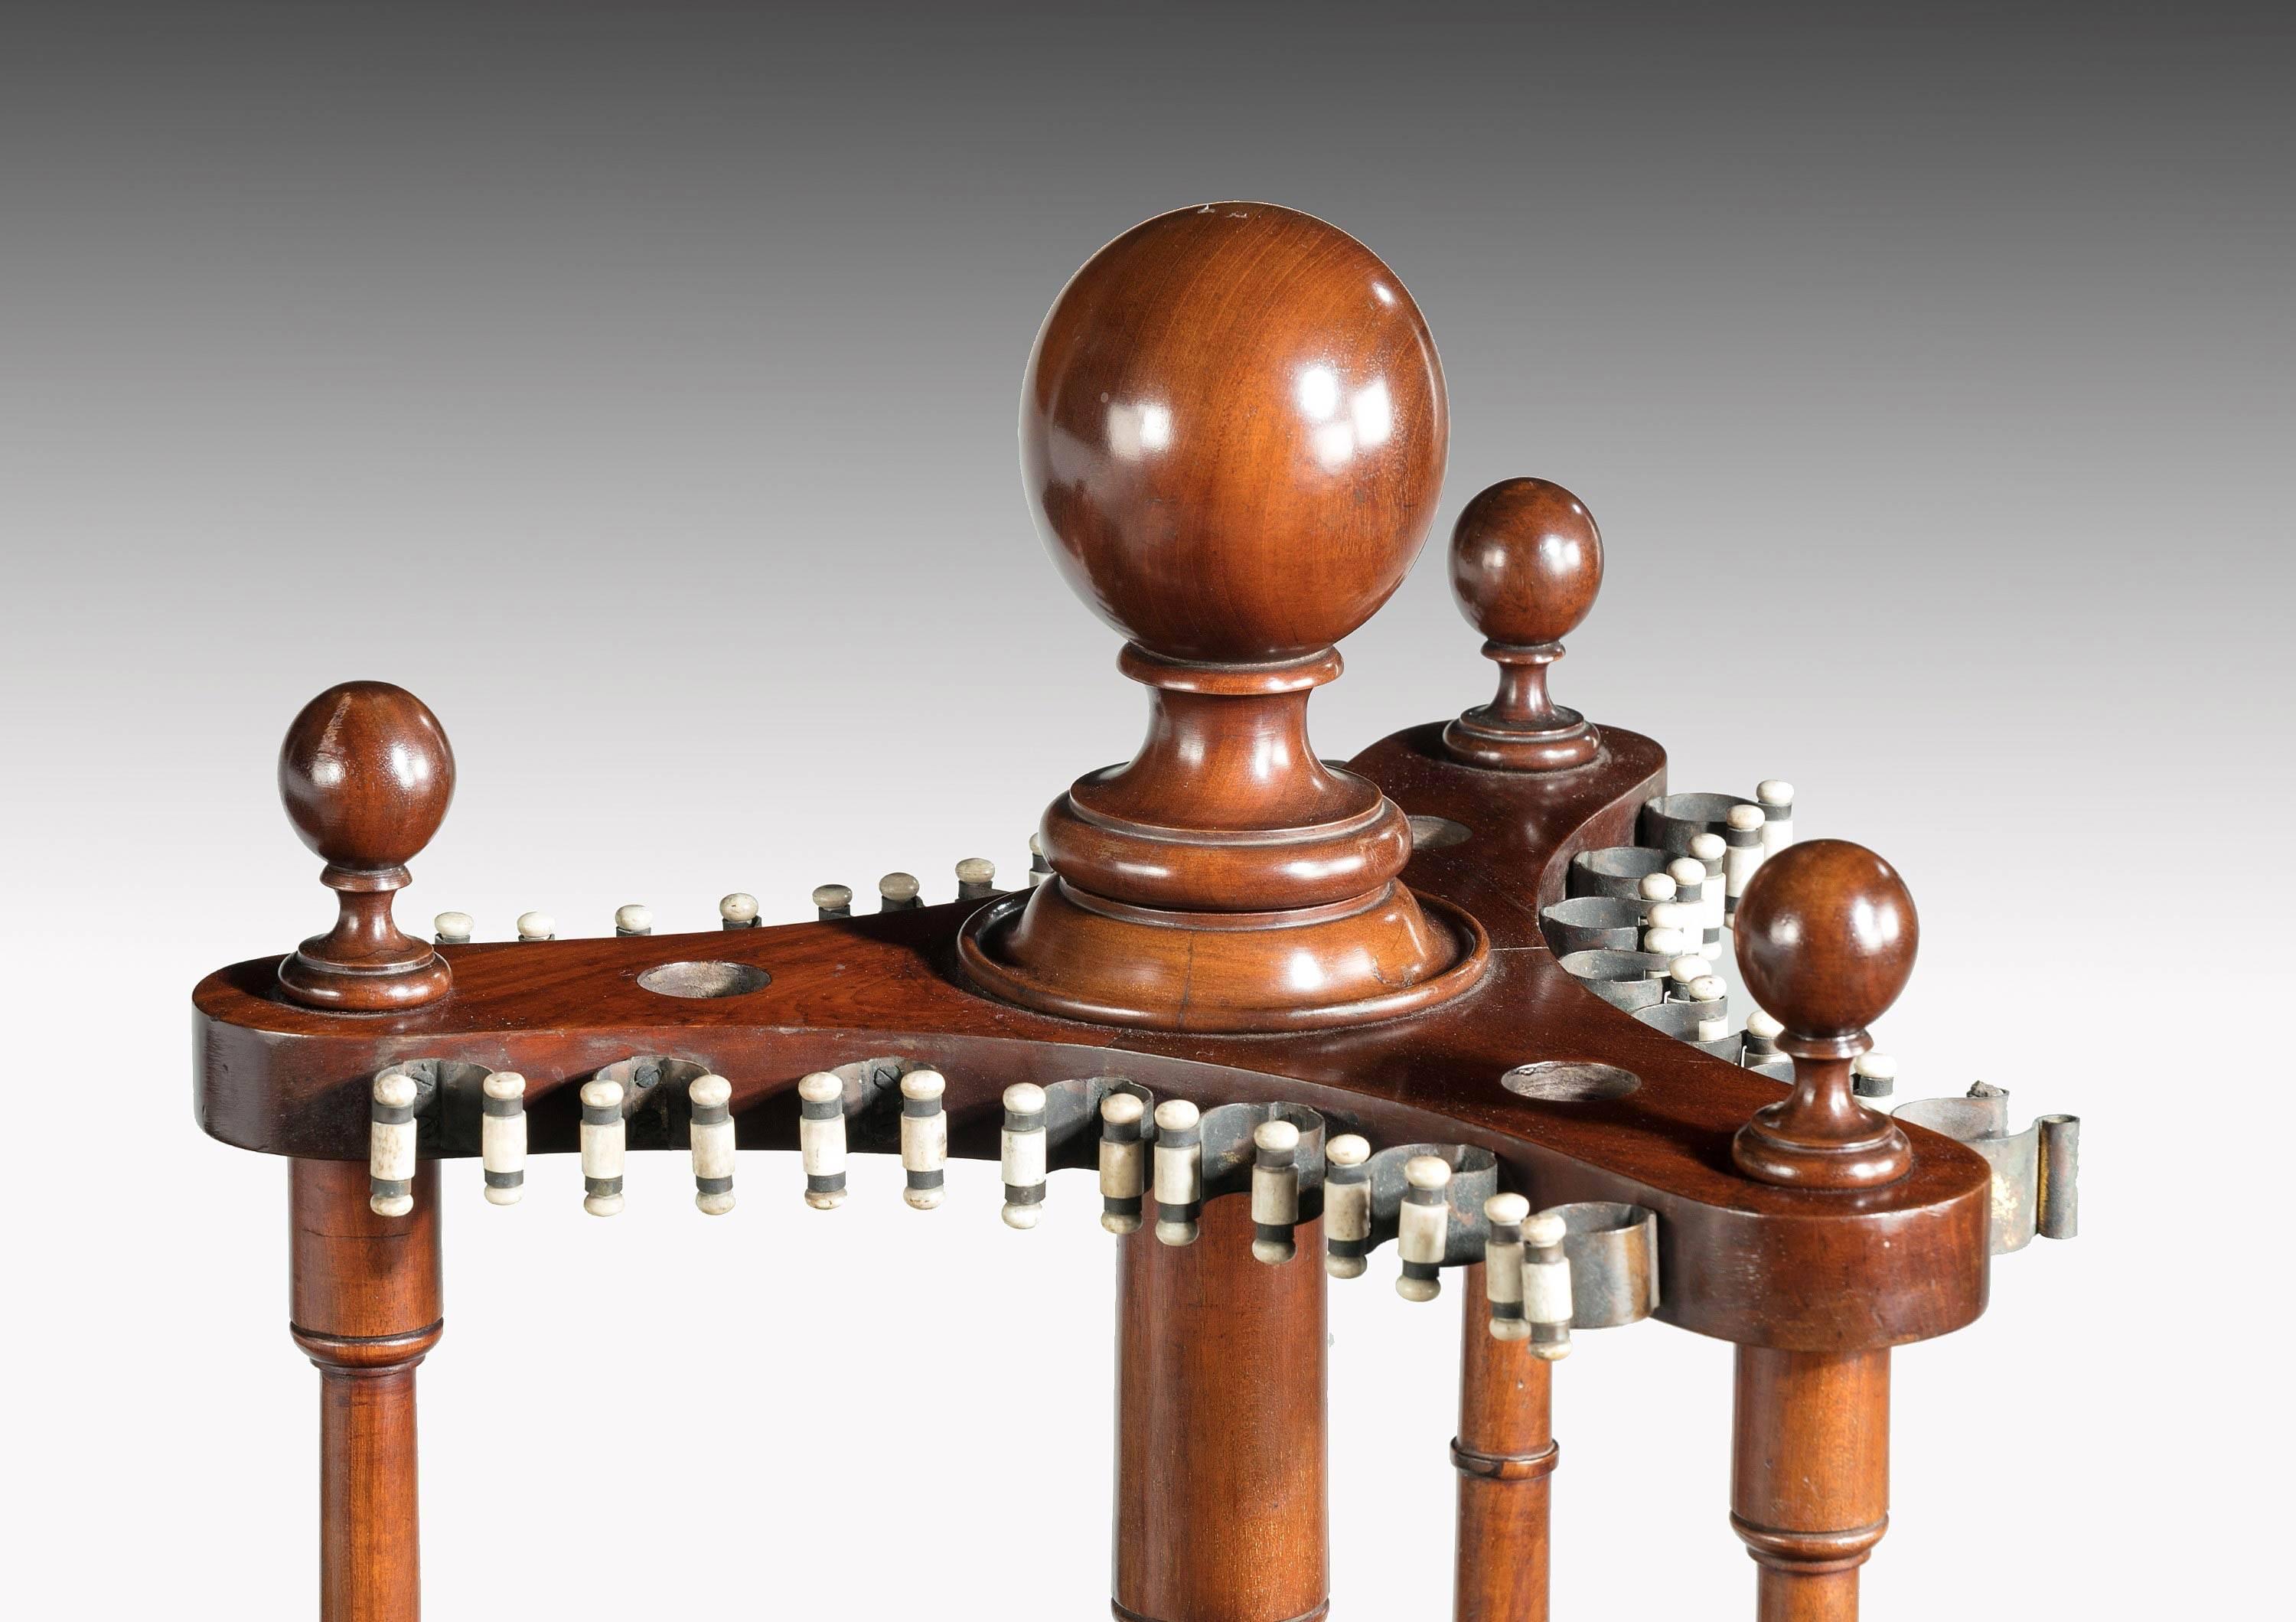 English Pair of 19th century mahogany snooker or pool cue holders